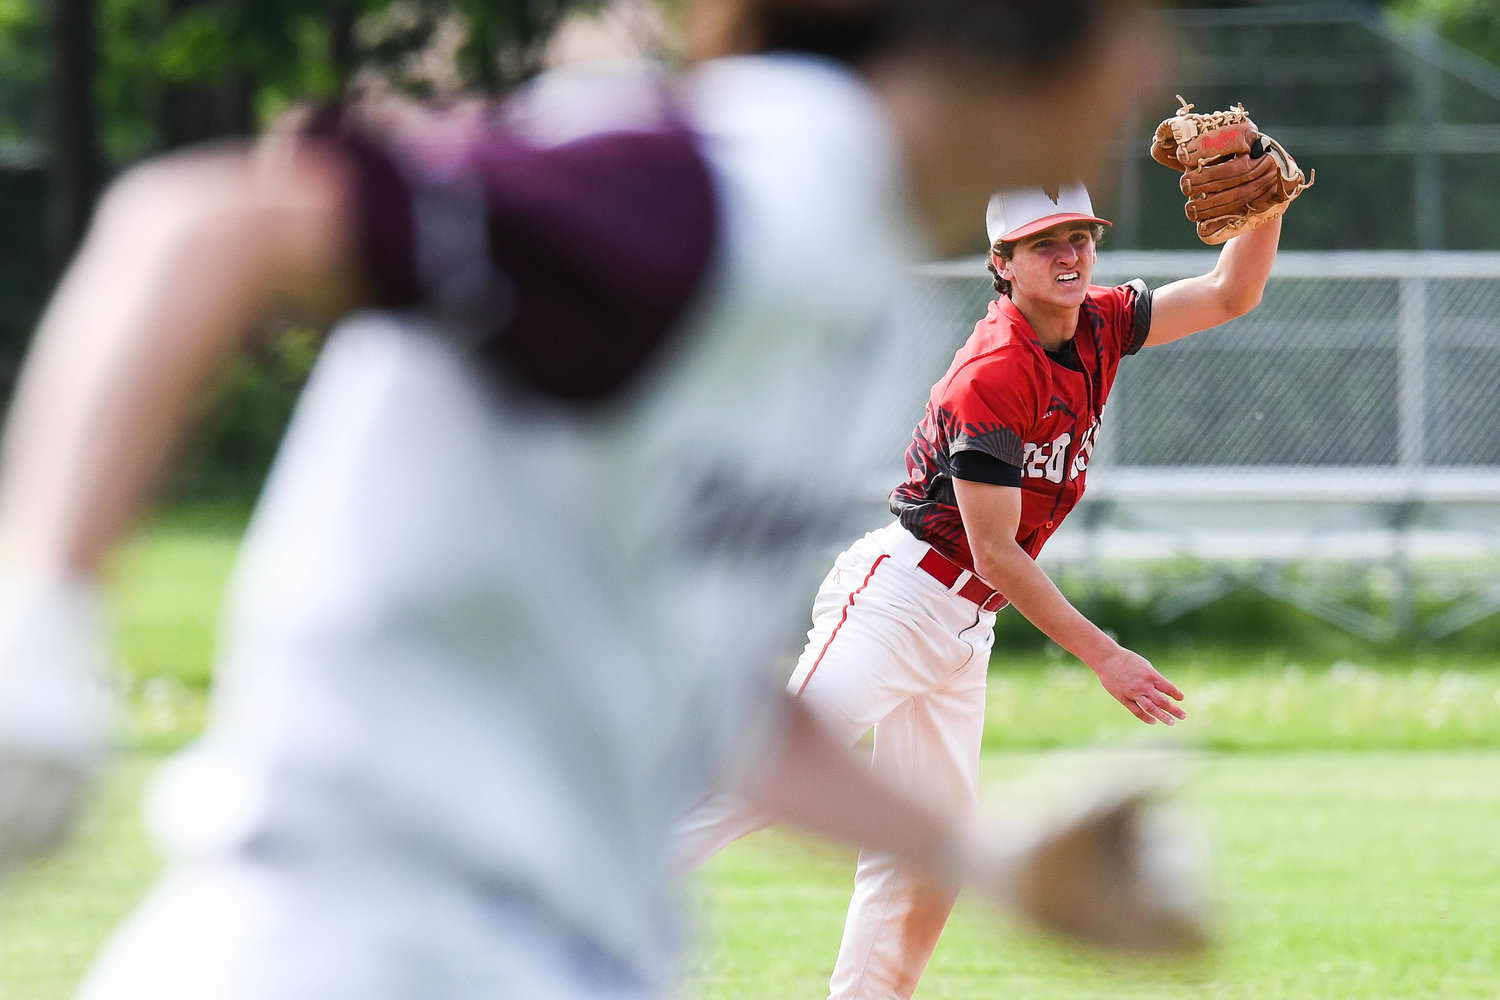 Vernon-Verona-Sherrill’s Bryce Palmer makes a throw during a game this spring. Palmer was named the Tri-Valley League’s Pioneer Division Player of the Year.